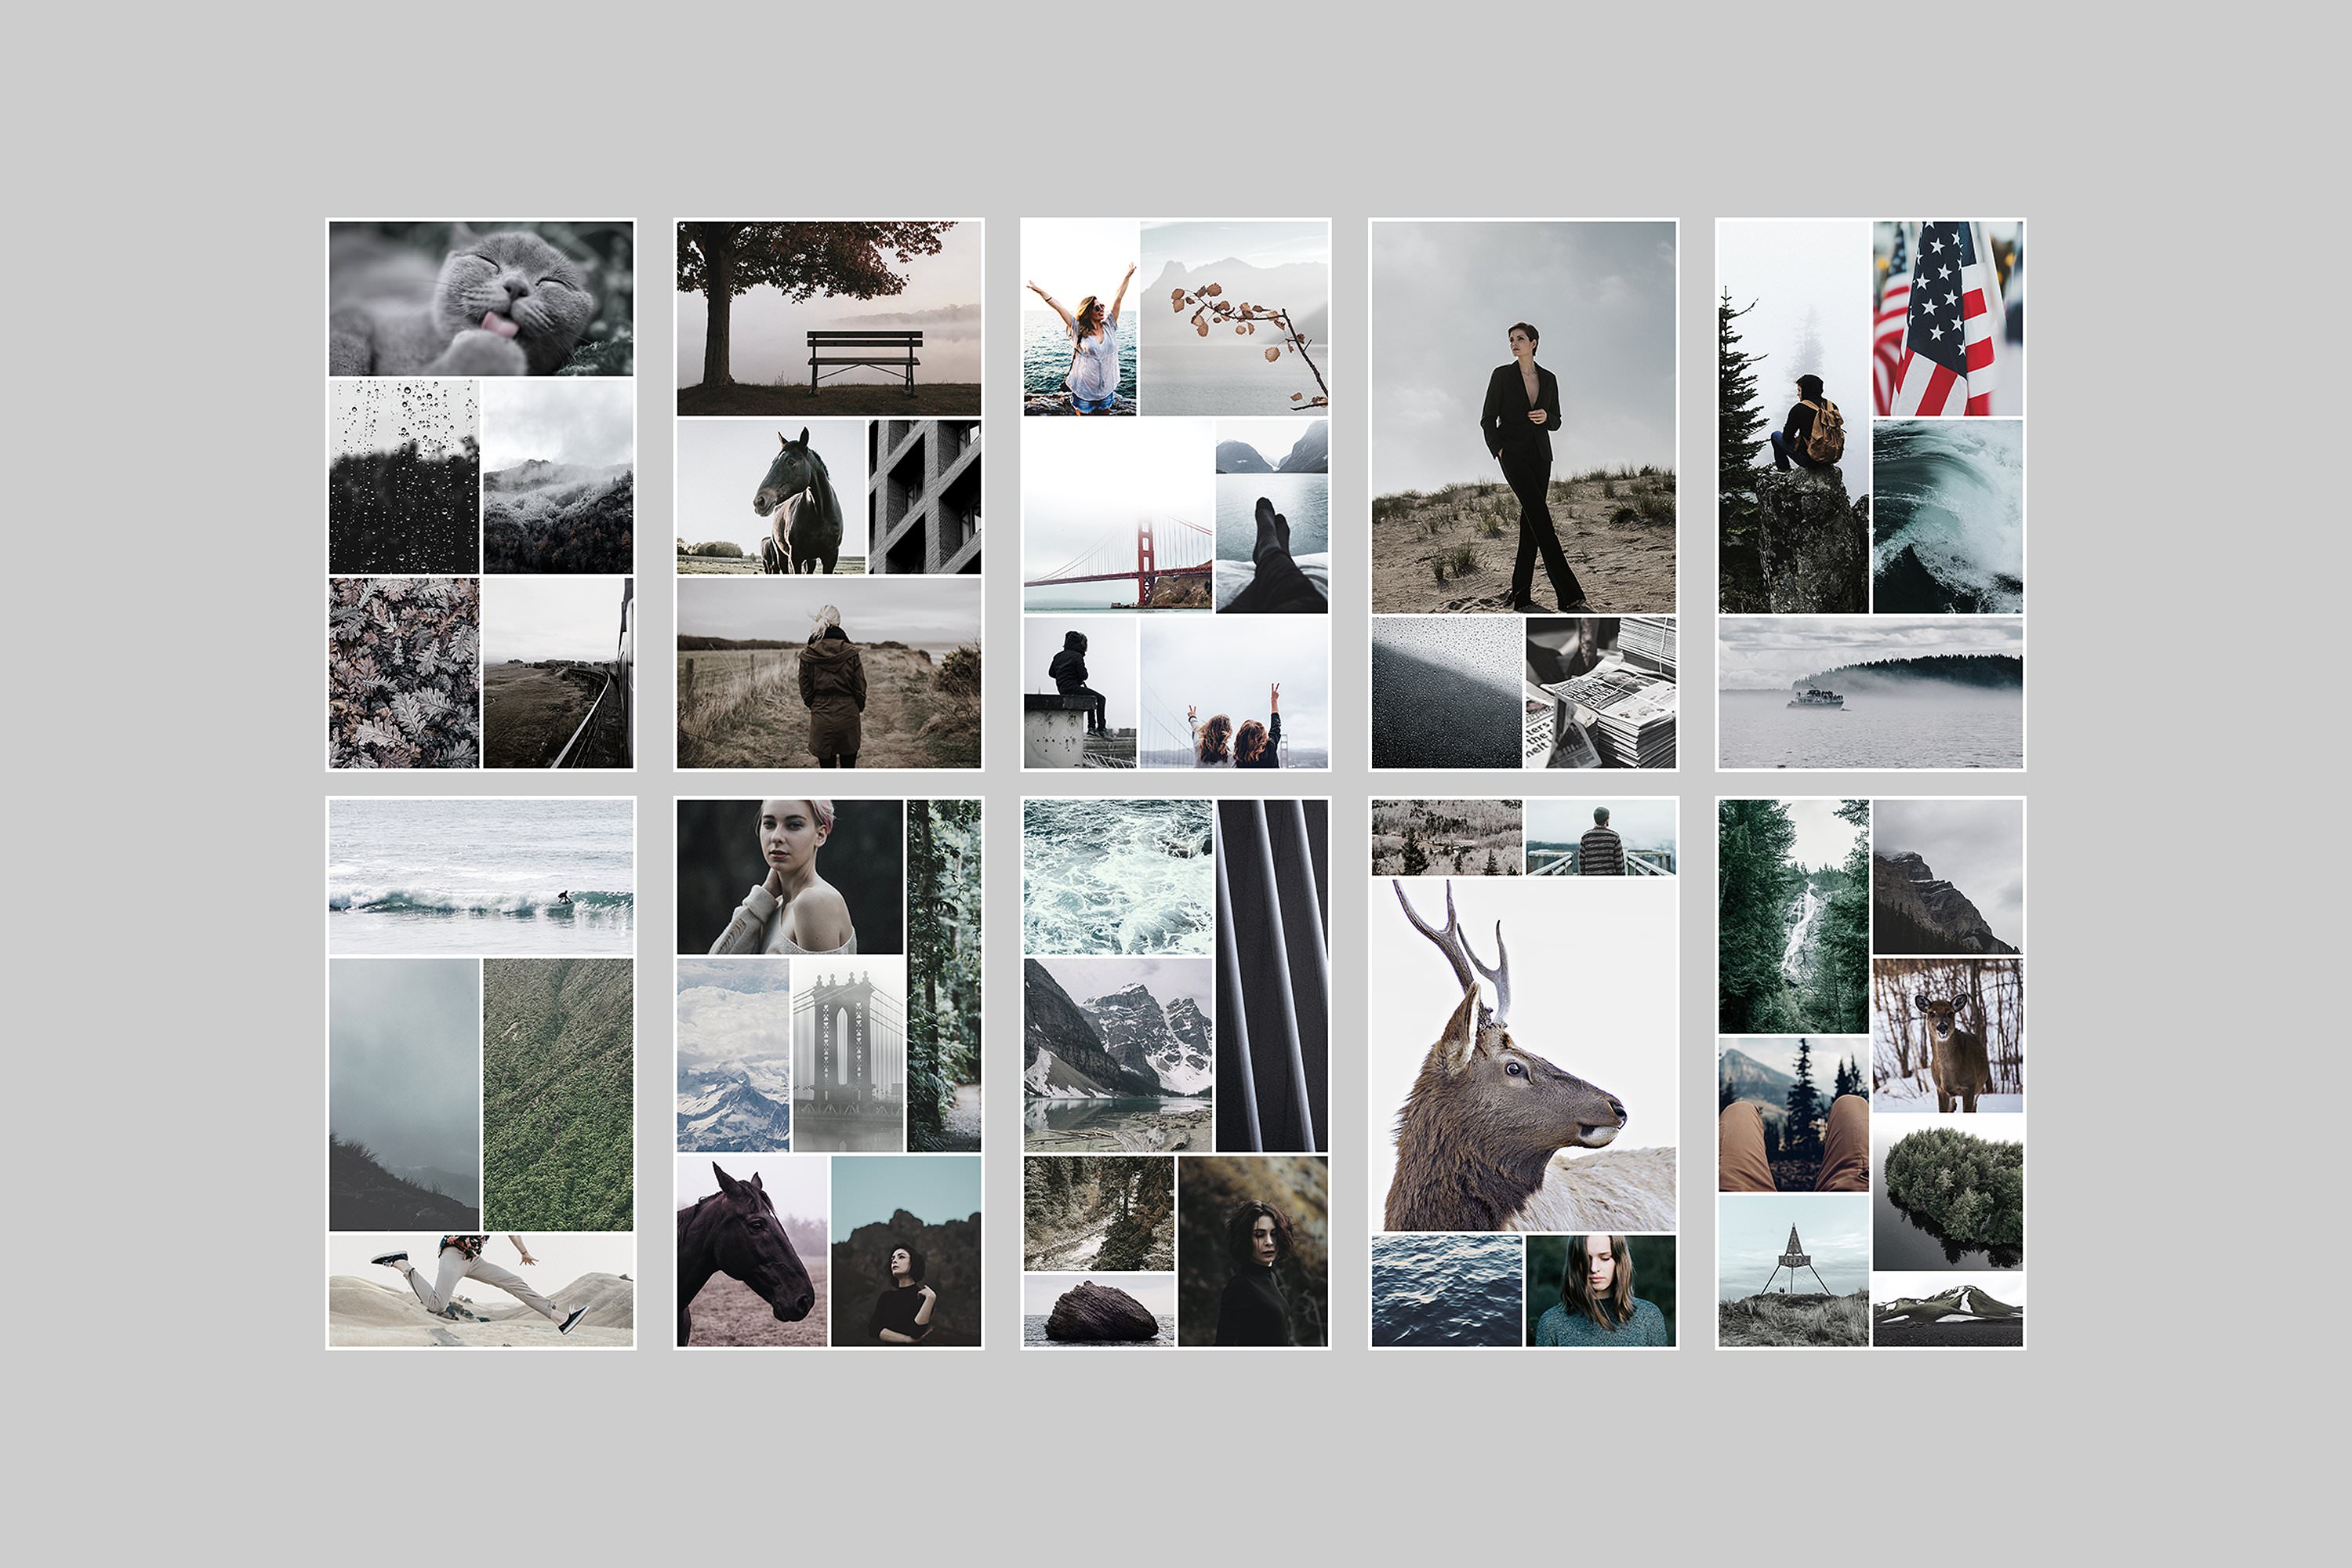 Image mood board templates for Instagram stories.